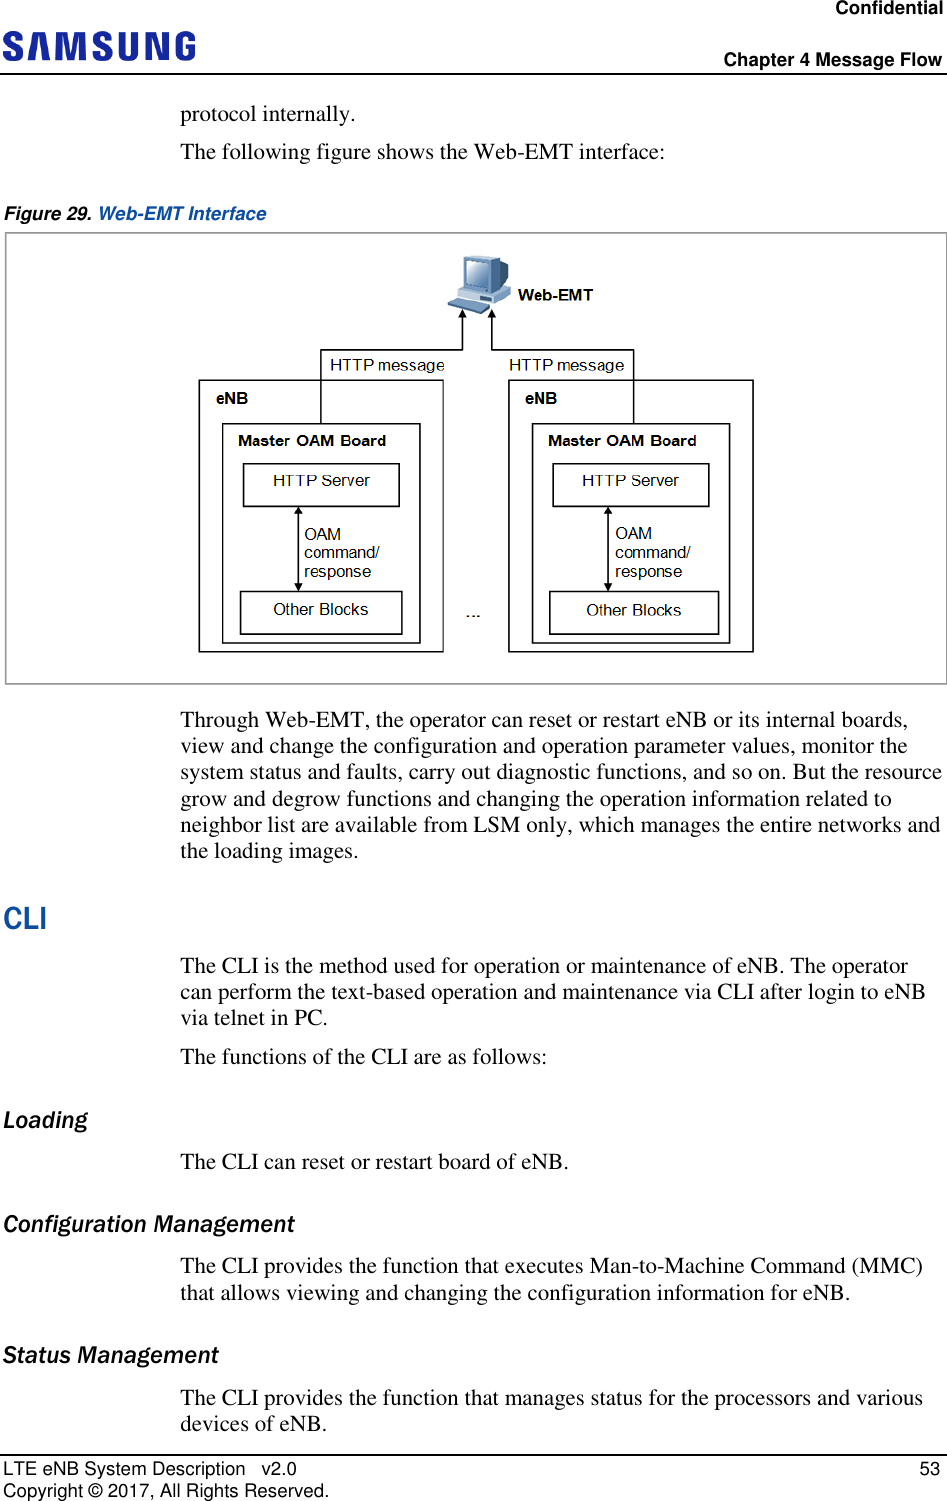 Confidential  Chapter 4 Message Flow LTE eNB System Description   v2.0   53 Copyright ©  2017, All Rights Reserved. protocol internally. The following figure shows the Web-EMT interface: Figure 29. Web-EMT Interface  Through Web-EMT, the operator can reset or restart eNB or its internal boards, view and change the configuration and operation parameter values, monitor the system status and faults, carry out diagnostic functions, and so on. But the resource grow and degrow functions and changing the operation information related to neighbor list are available from LSM only, which manages the entire networks and the loading images. CLI The CLI is the method used for operation or maintenance of eNB. The operator can perform the text-based operation and maintenance via CLI after login to eNB via telnet in PC. The functions of the CLI are as follows: Loading The CLI can reset or restart board of eNB. Configuration Management The CLI provides the function that executes Man-to-Machine Command (MMC) that allows viewing and changing the configuration information for eNB. Status Management The CLI provides the function that manages status for the processors and various devices of eNB. 